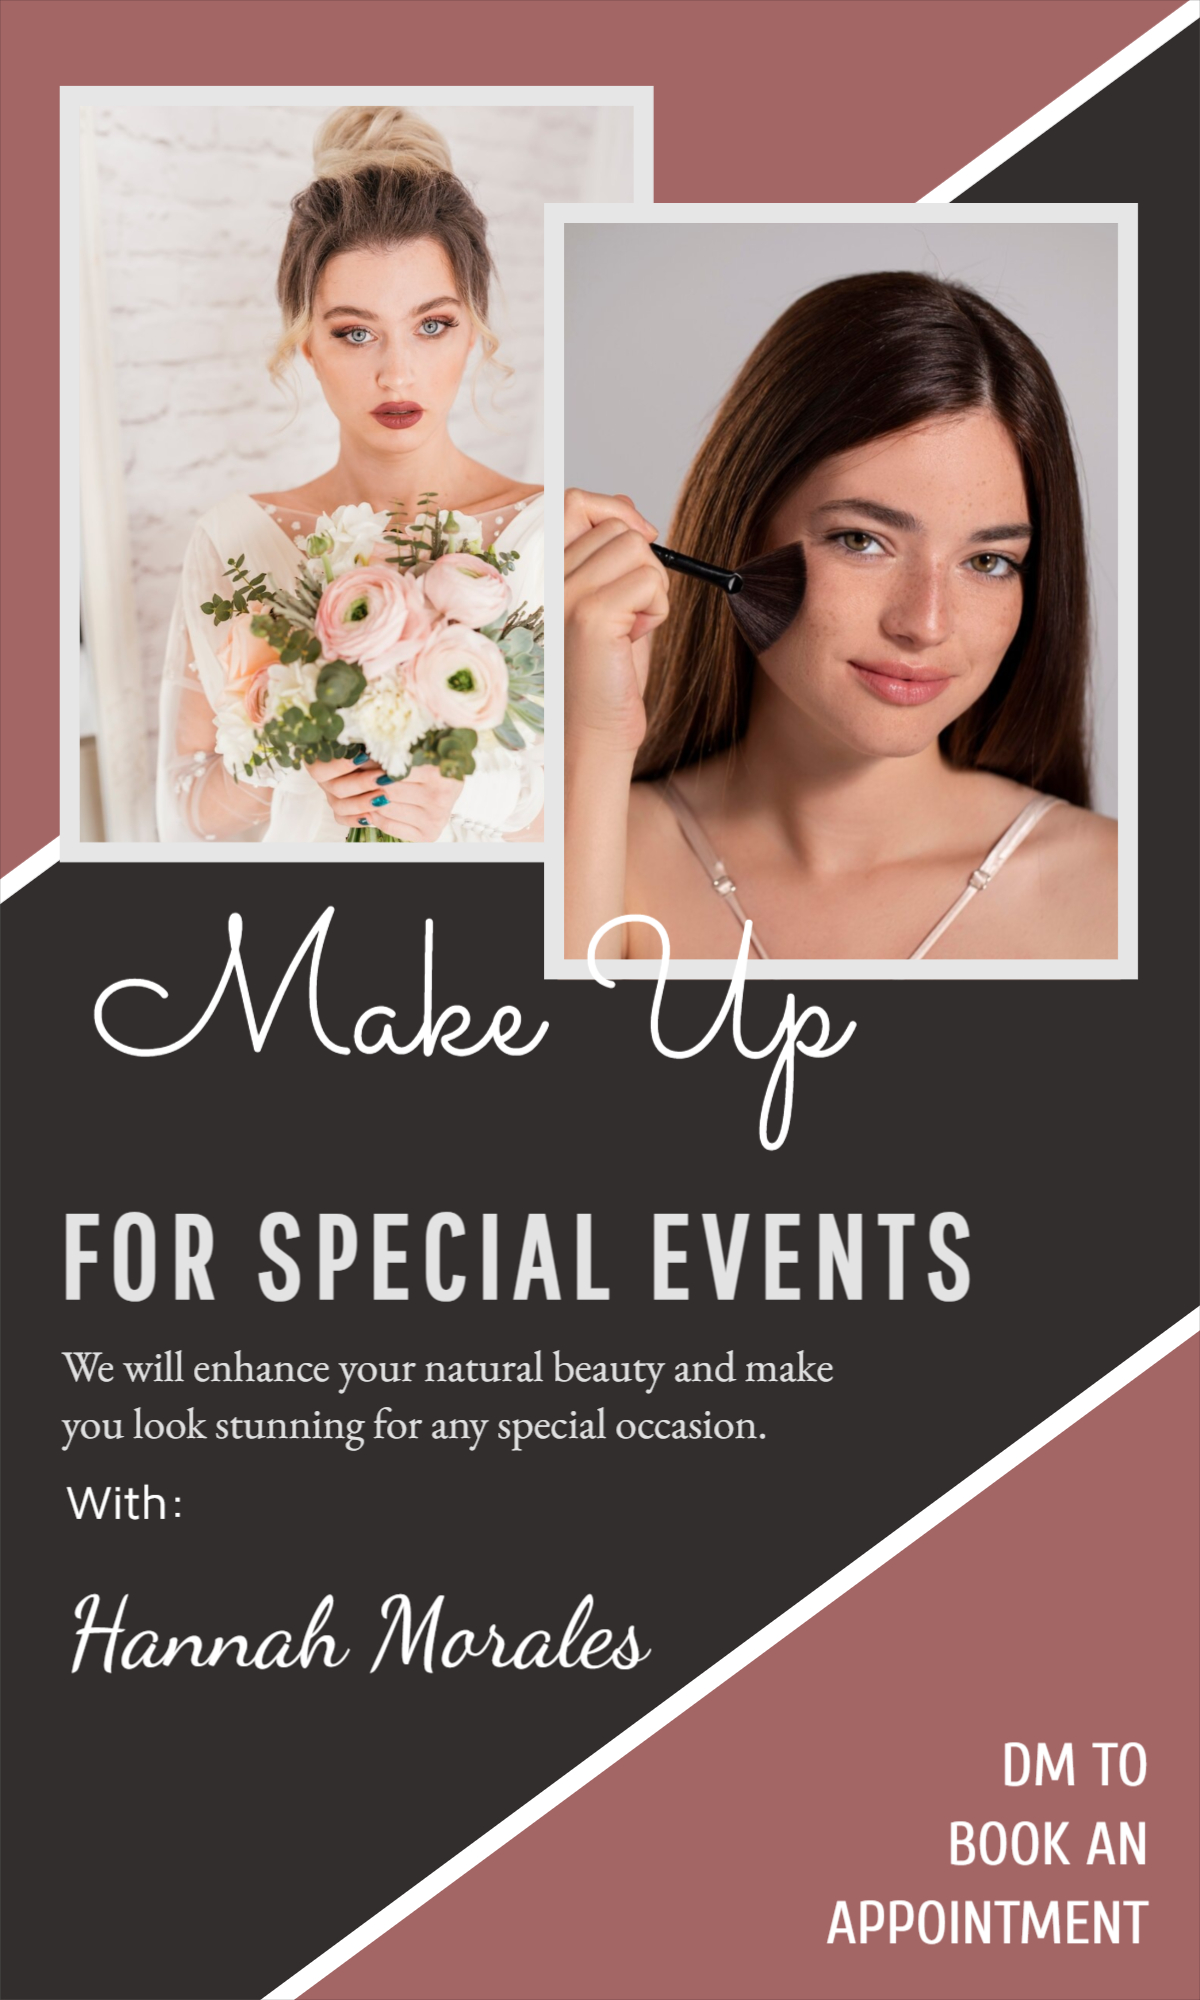  Make up Profesional service Poster design download for free